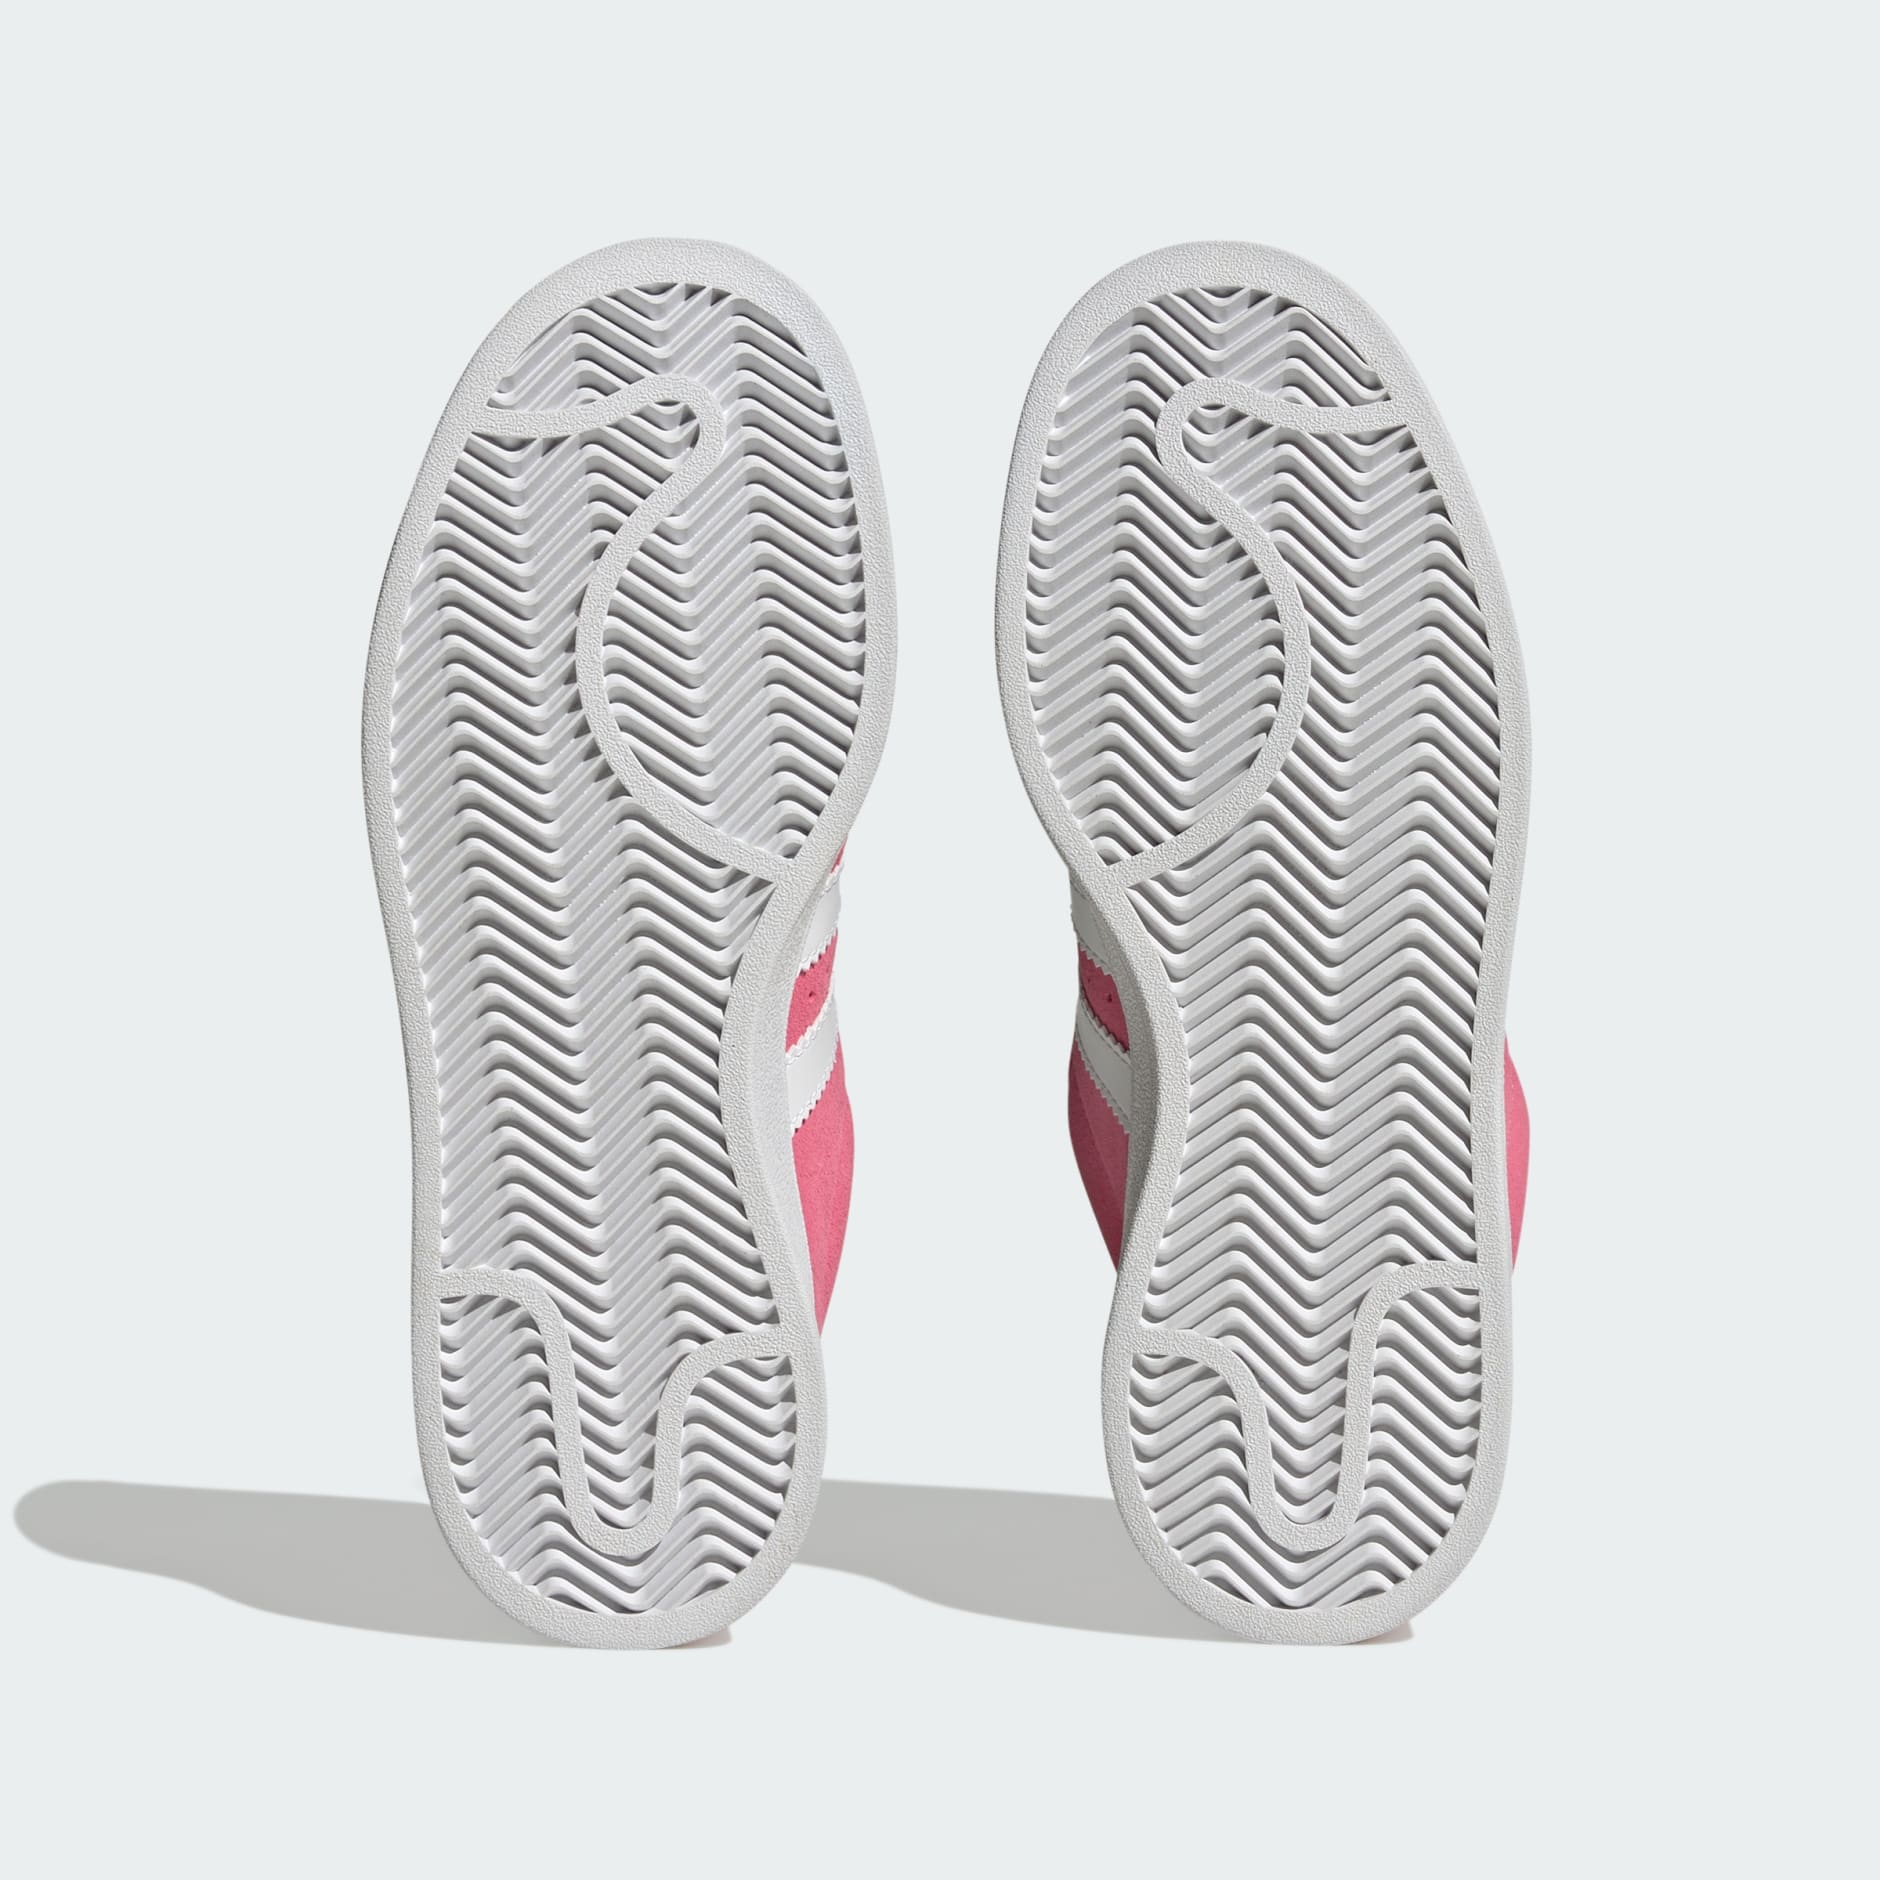 Women's Shoes - Campus 00s Shoes - Pink | adidas Oman